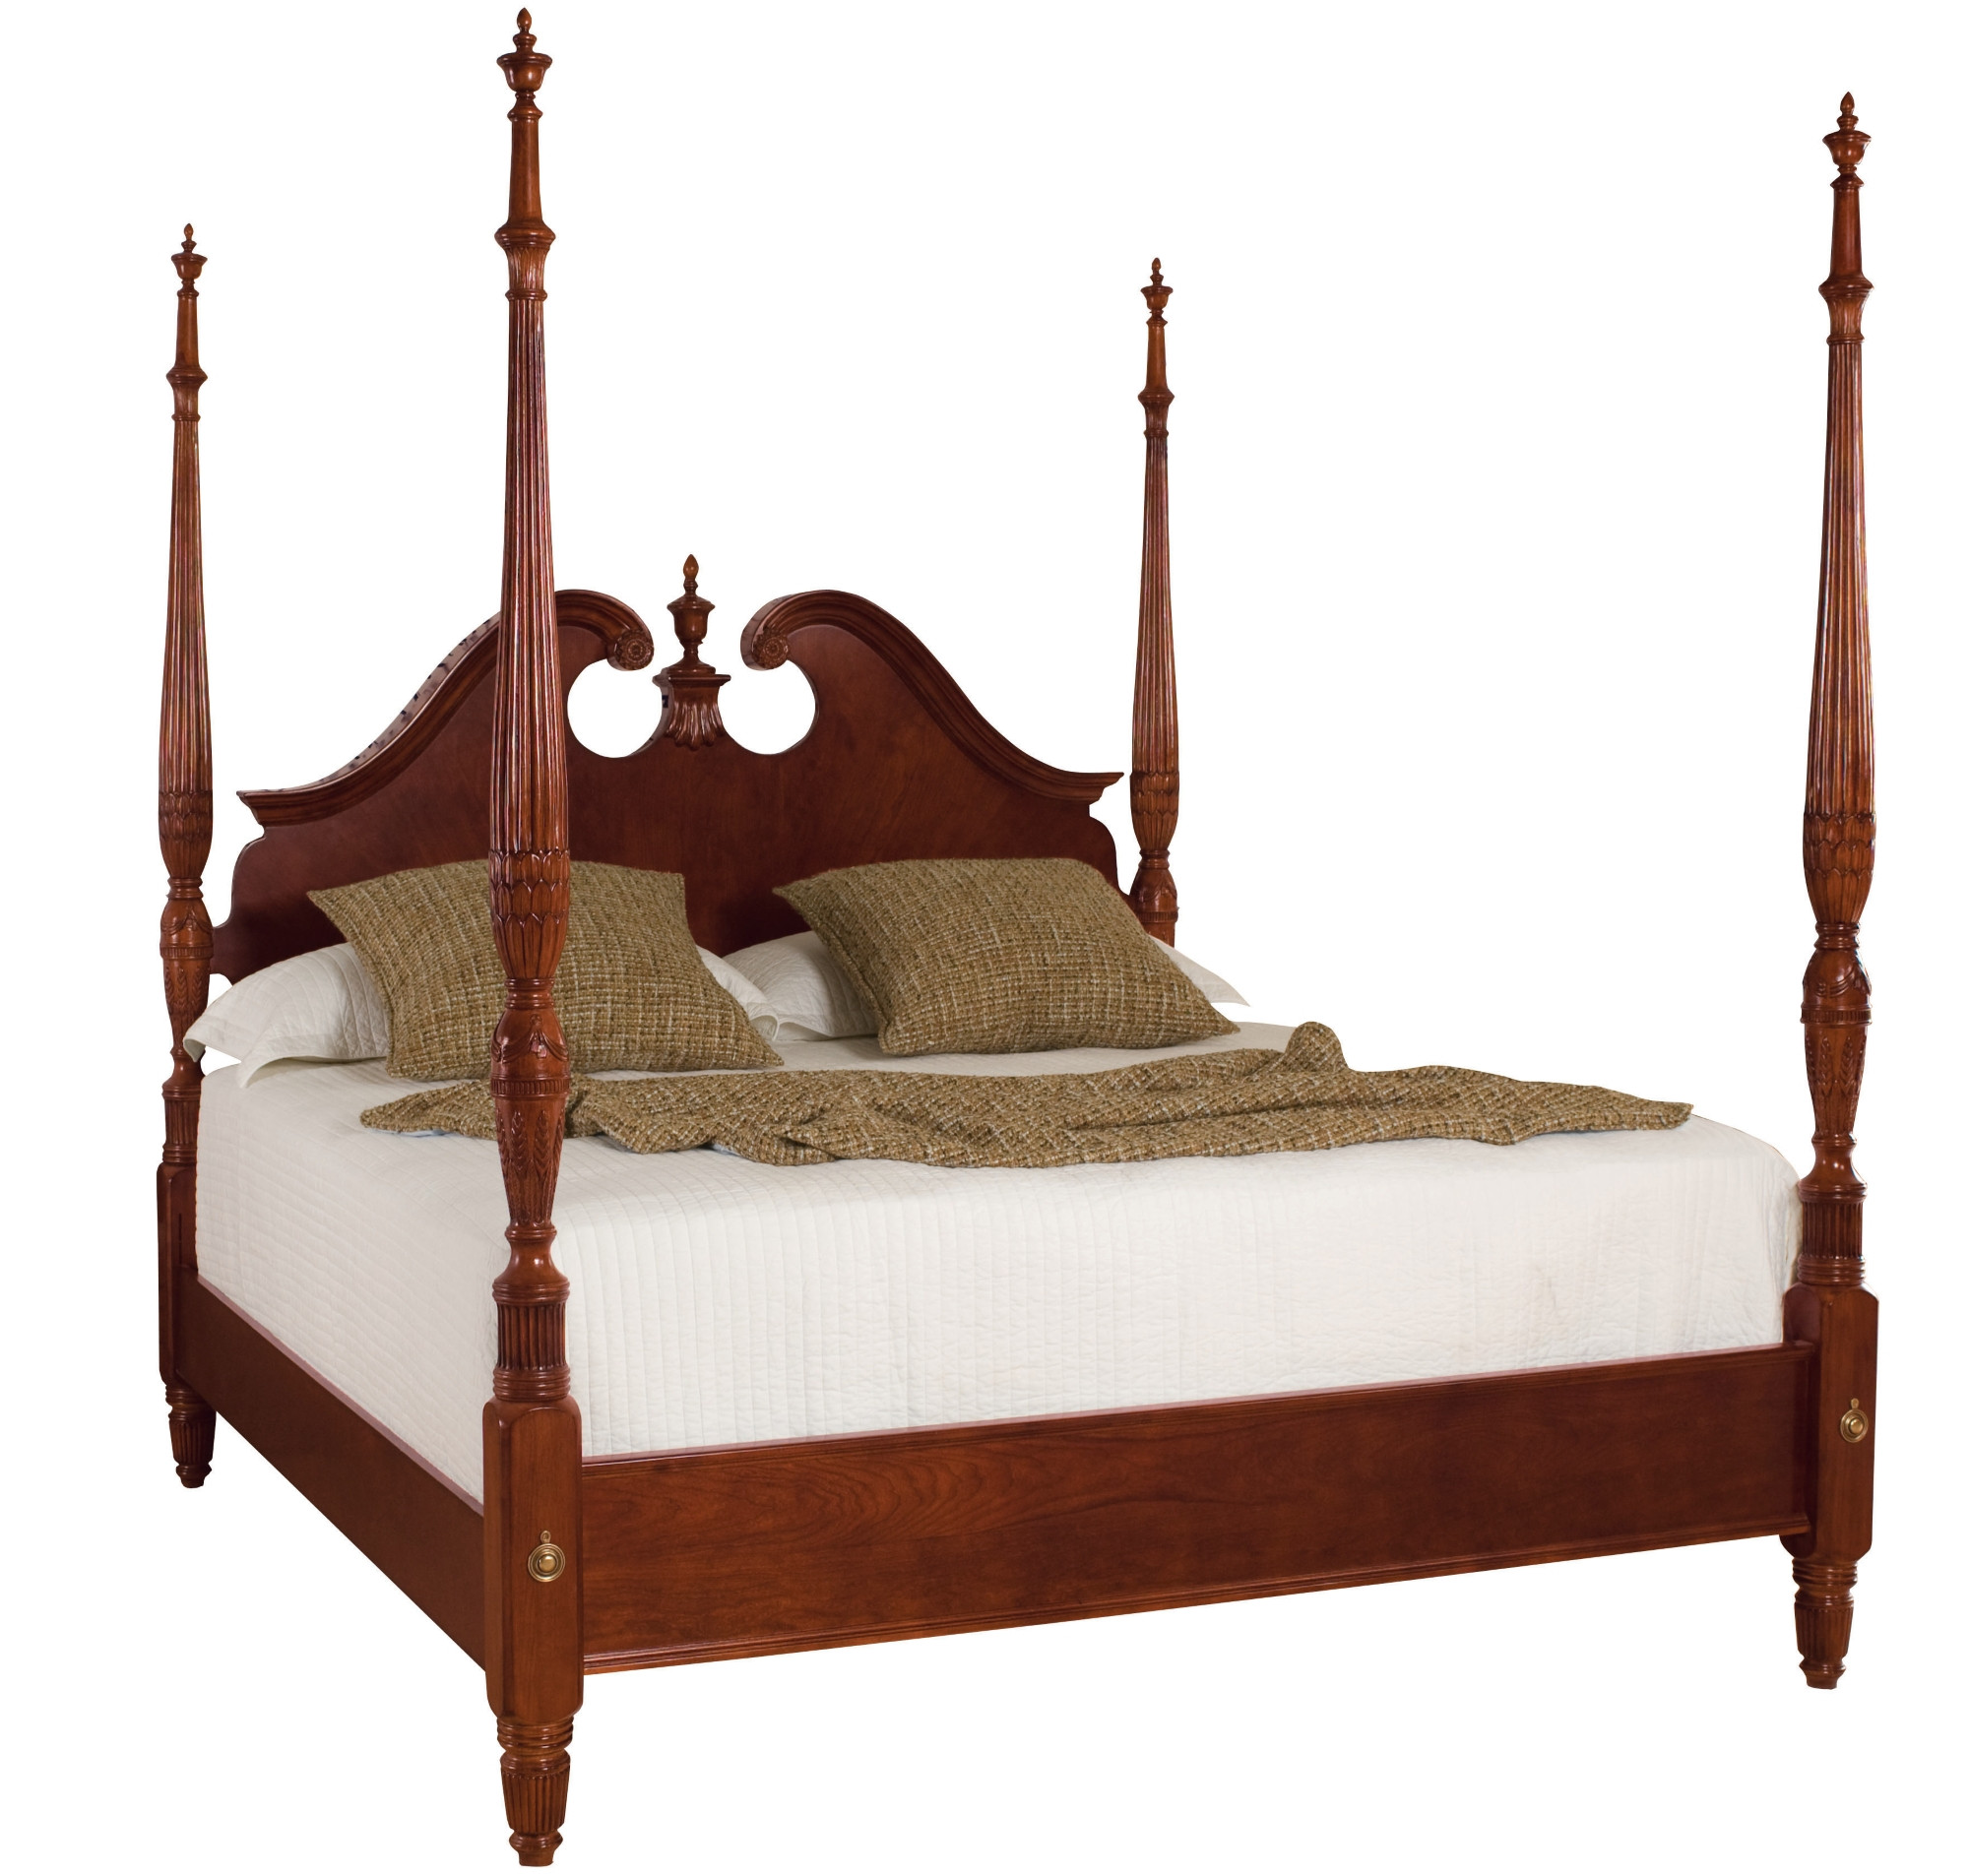 American Drew Cherry Grove King, Cherry King Canopy Bed